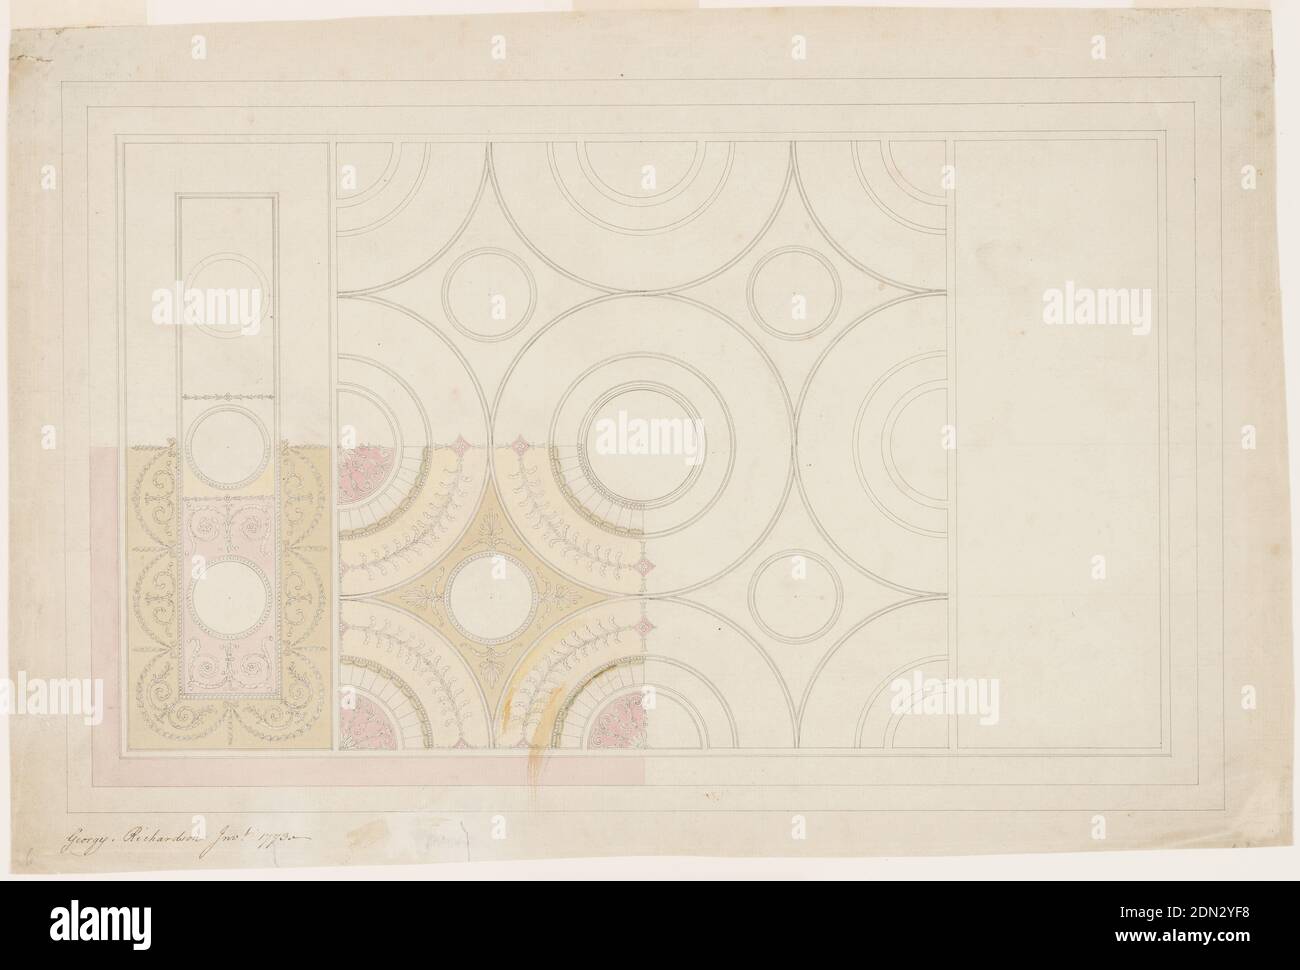 Design for an Oblong Ceiling, George Richardson, British, ca. 1736 - 1813, Pen and black ink, brush and watercolor, black chalk on paper, Horizontal format design for an oblong plaster ceiling. Shown are the scheme of the decorations of the central square and of the left sections and the decoration of the lower left quarter of the ceiling. Interlaced ribbons form in the central part one large circle and segments. They are subdivided in smaller circles., London, England, 1773, architecture, interiors, Drawing Stock Photo